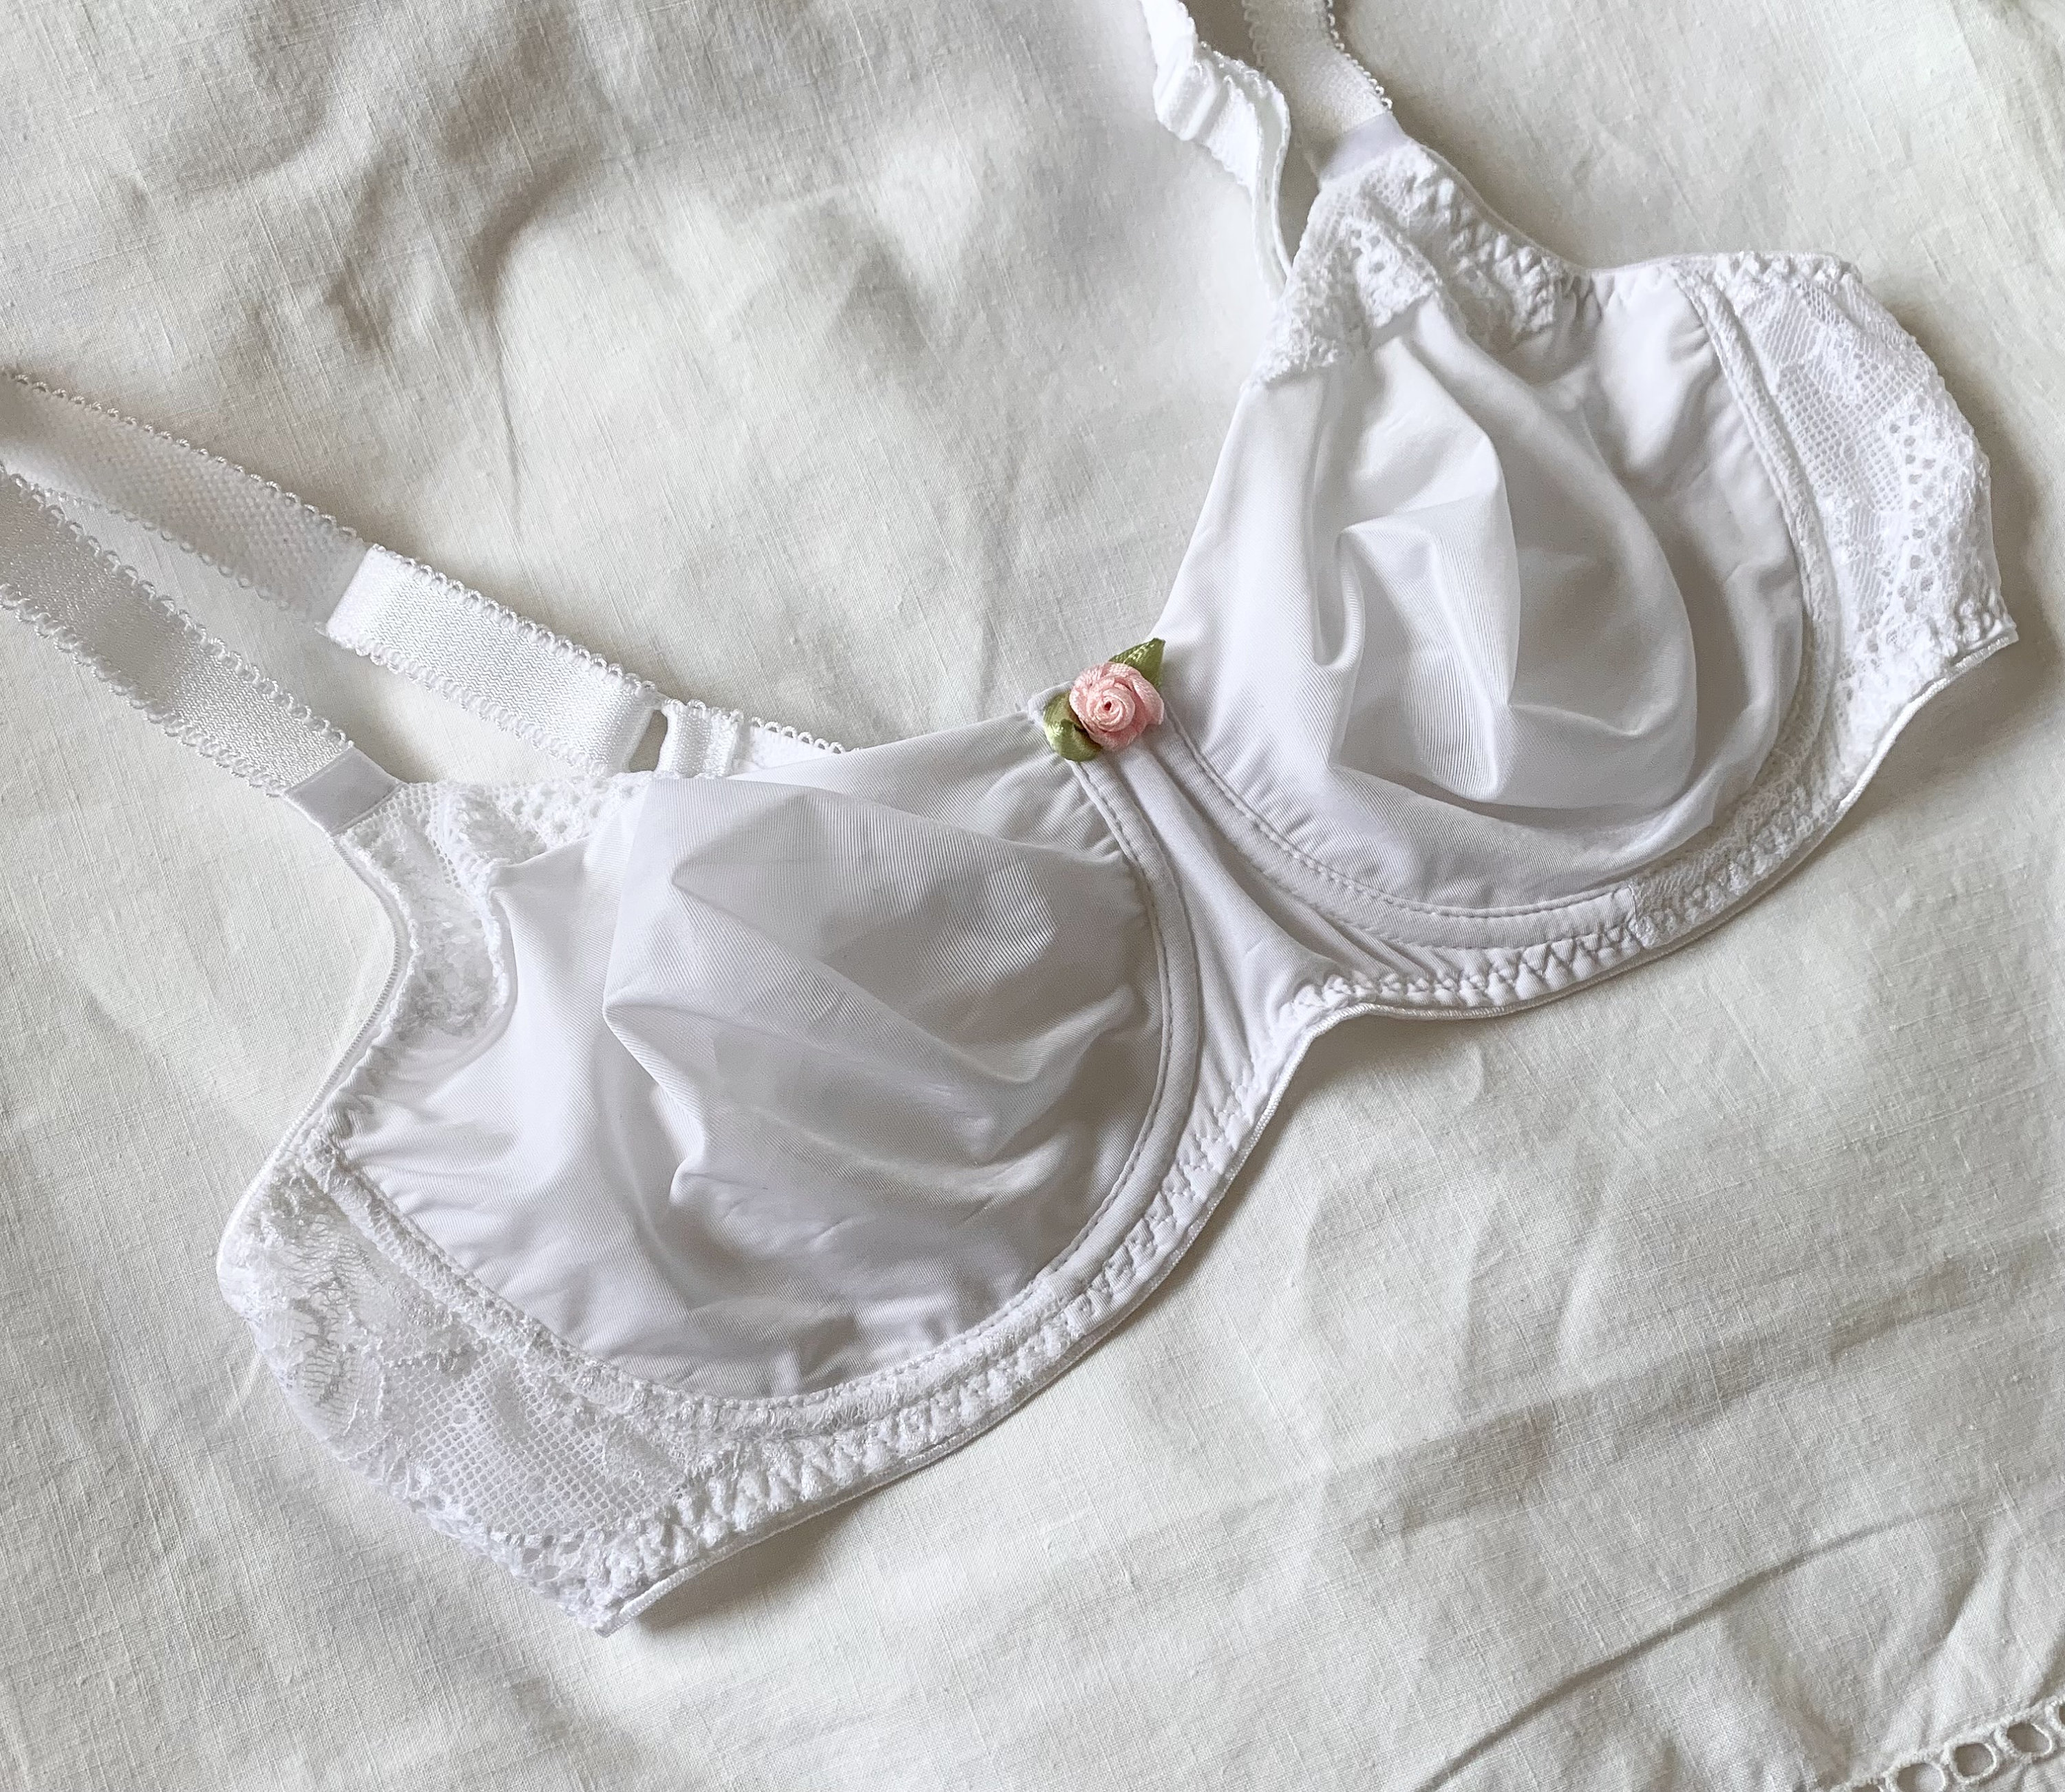 Young Hearts Malaysia - Eyelet Lace Bra